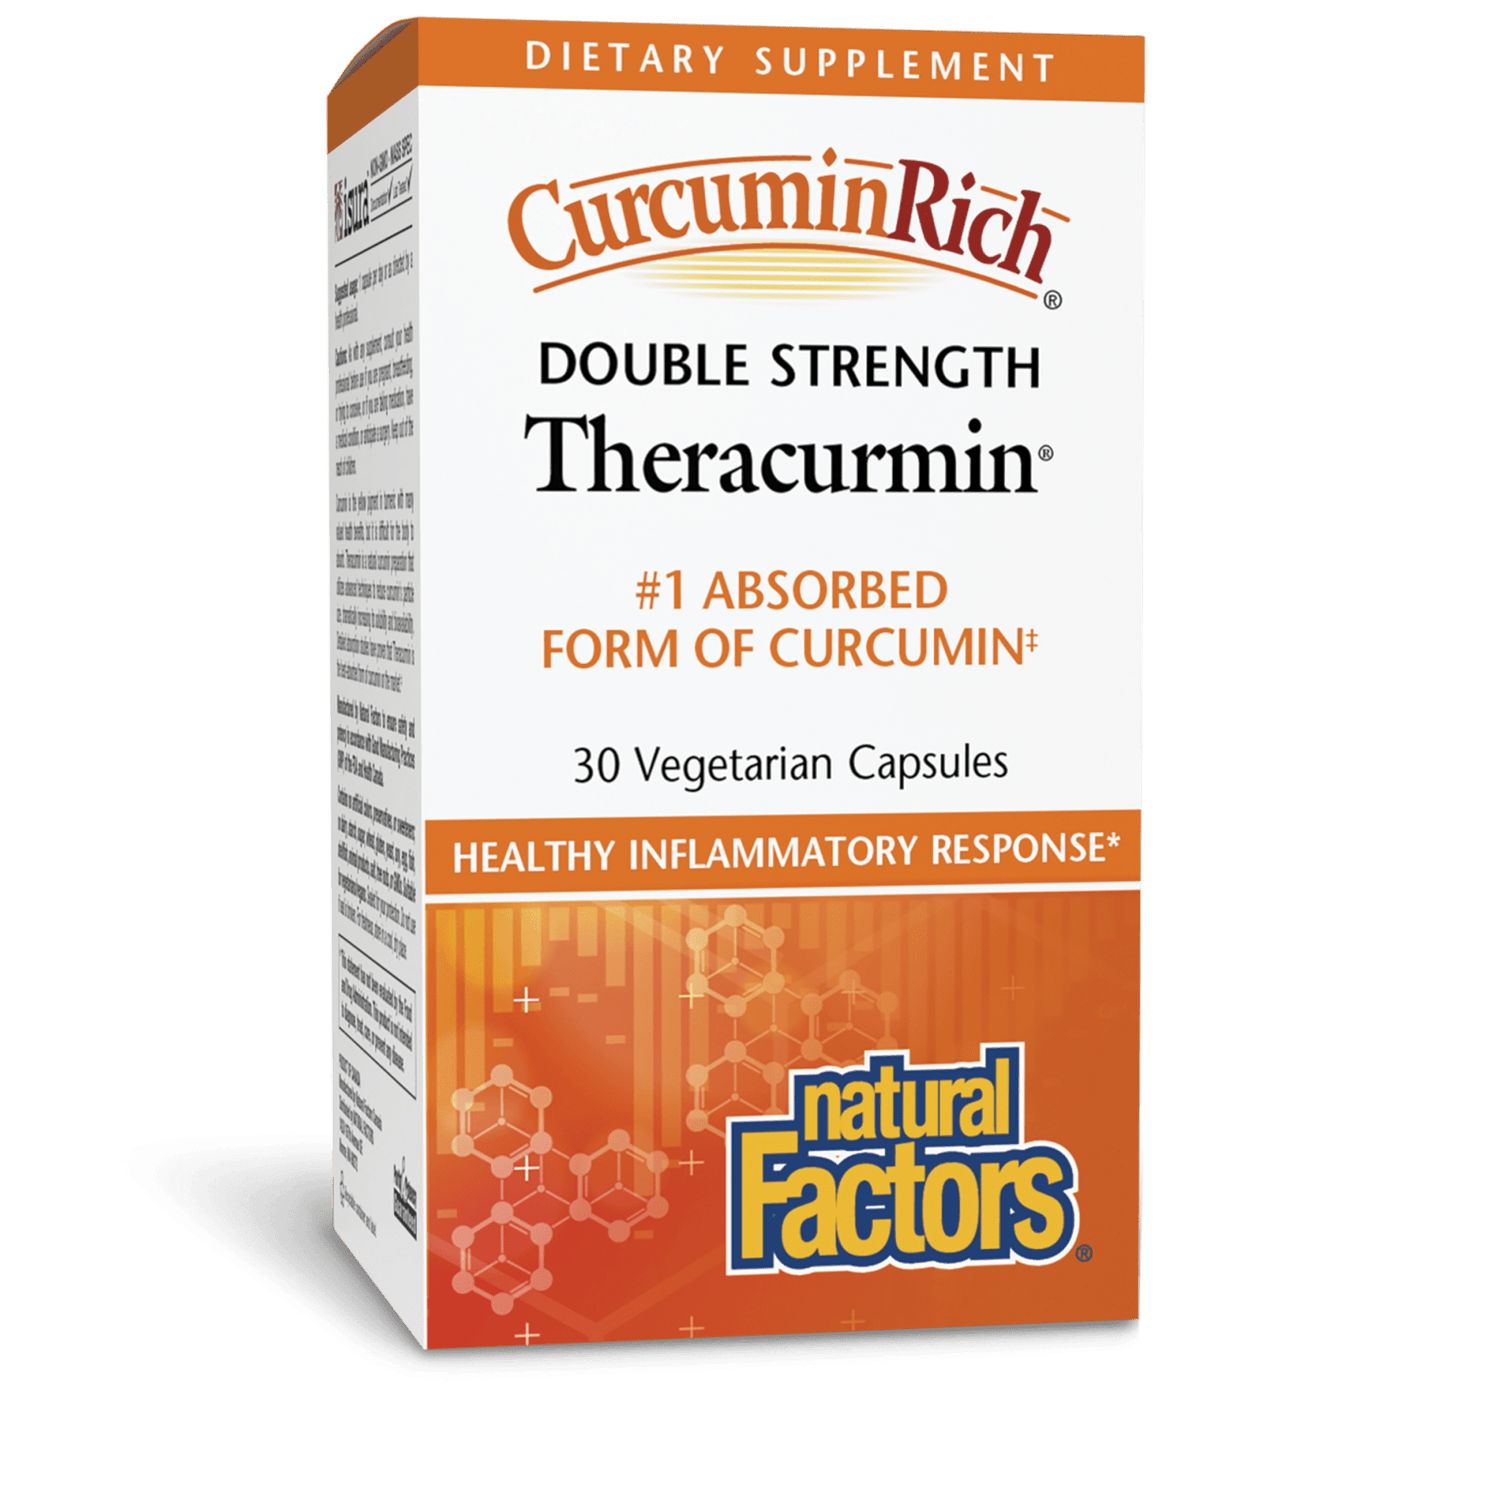 Double Strength Theracurmin|variant|hi-res|4543U